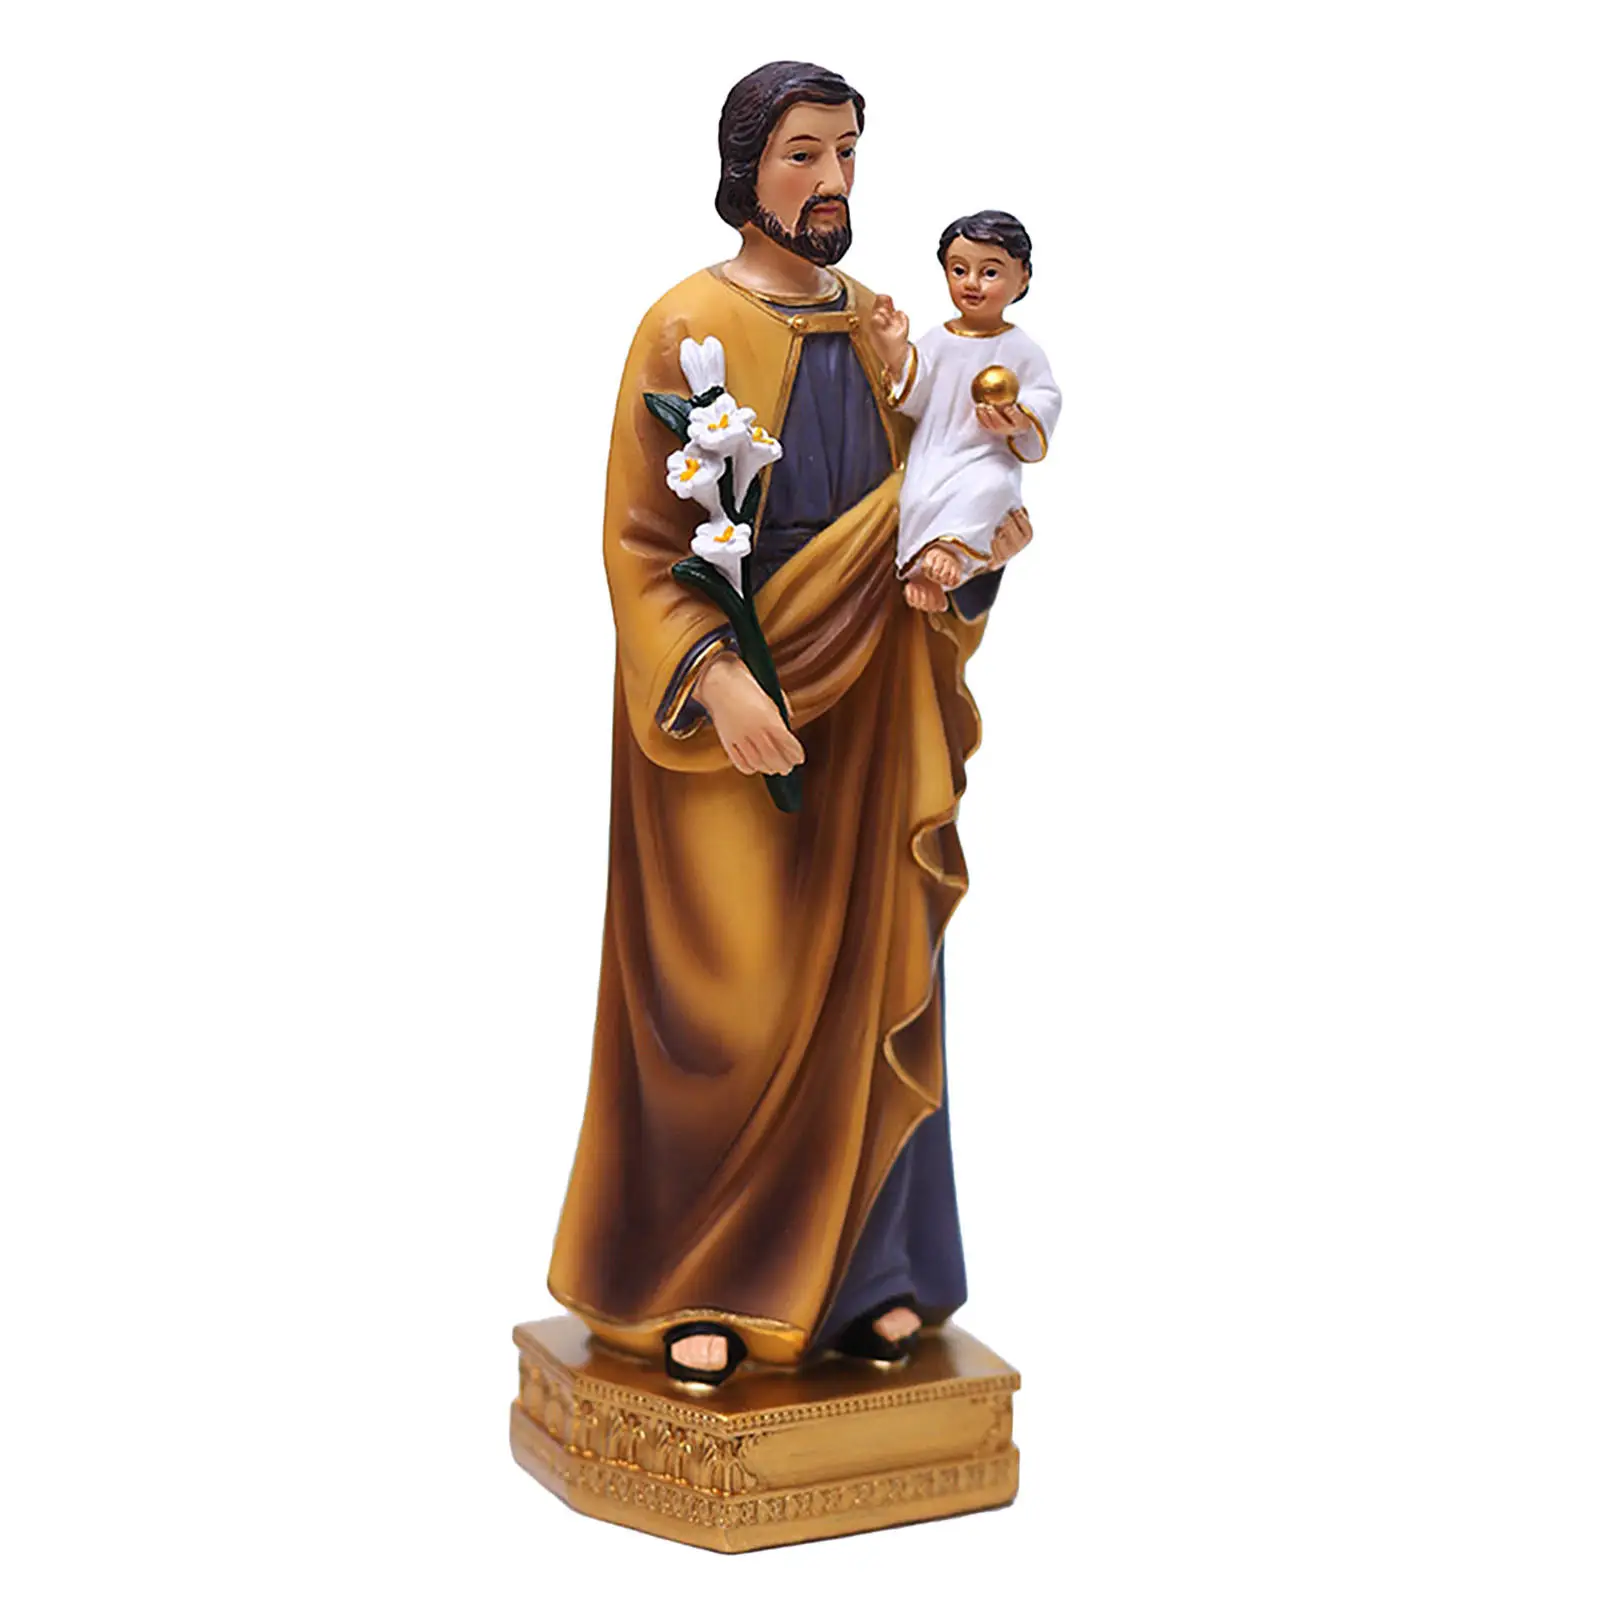 Saint Joseph and Child Jesus on Base 20cm Resin Colored Statue Patron of Fathers & Employment